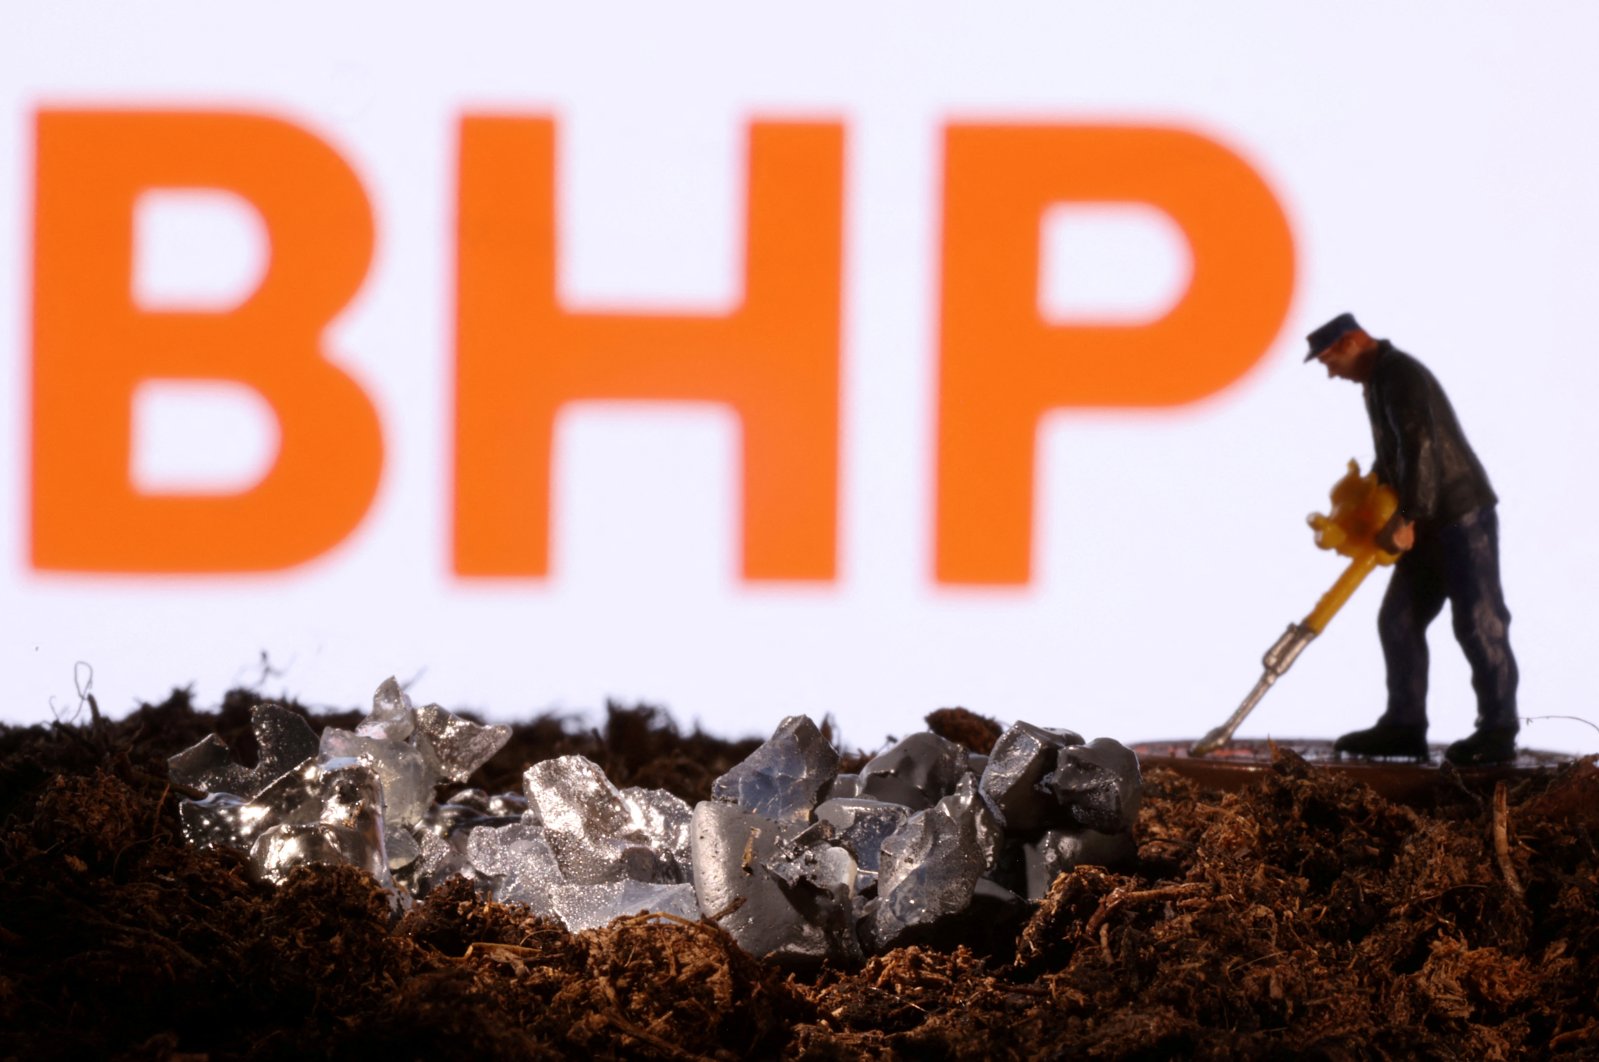  A small toy figure and mineral imitation are seen in front of the BHP logo in this illustration taken Nov. 19, 2021. (Reuters Photo)